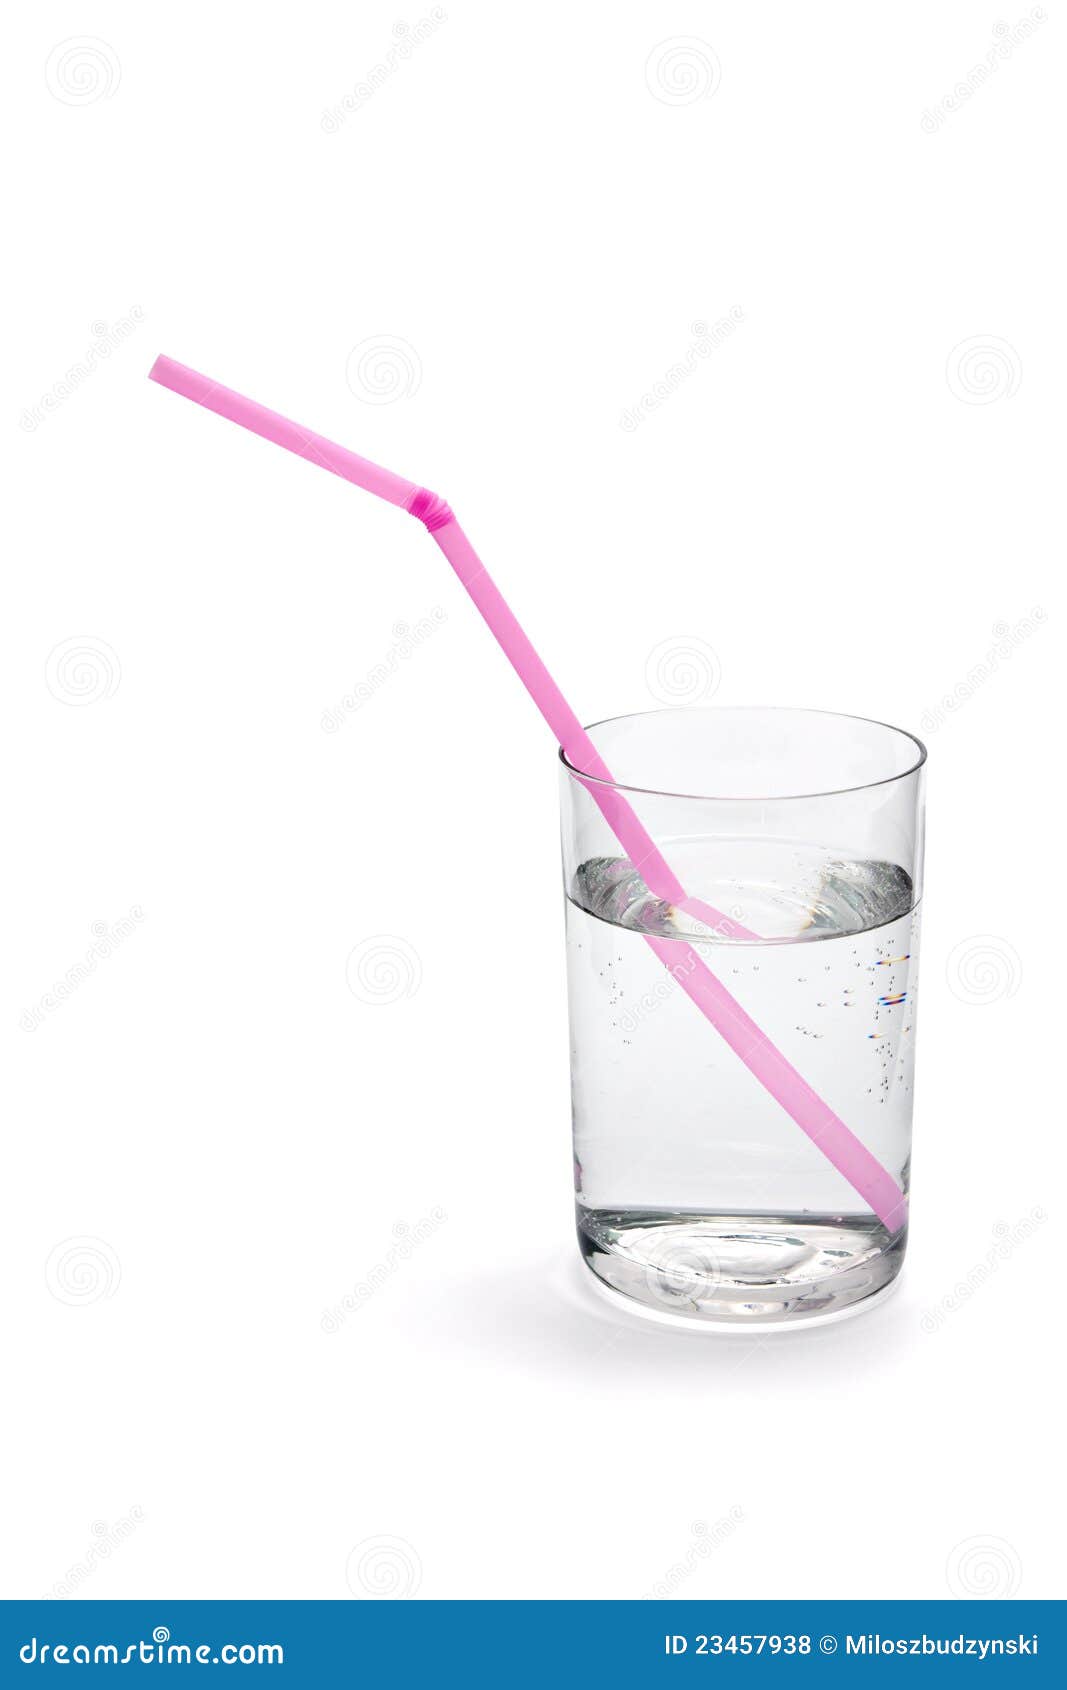 https://thumbs.dreamstime.com/z/drinking-straw-refraction-water-23457938.jpg